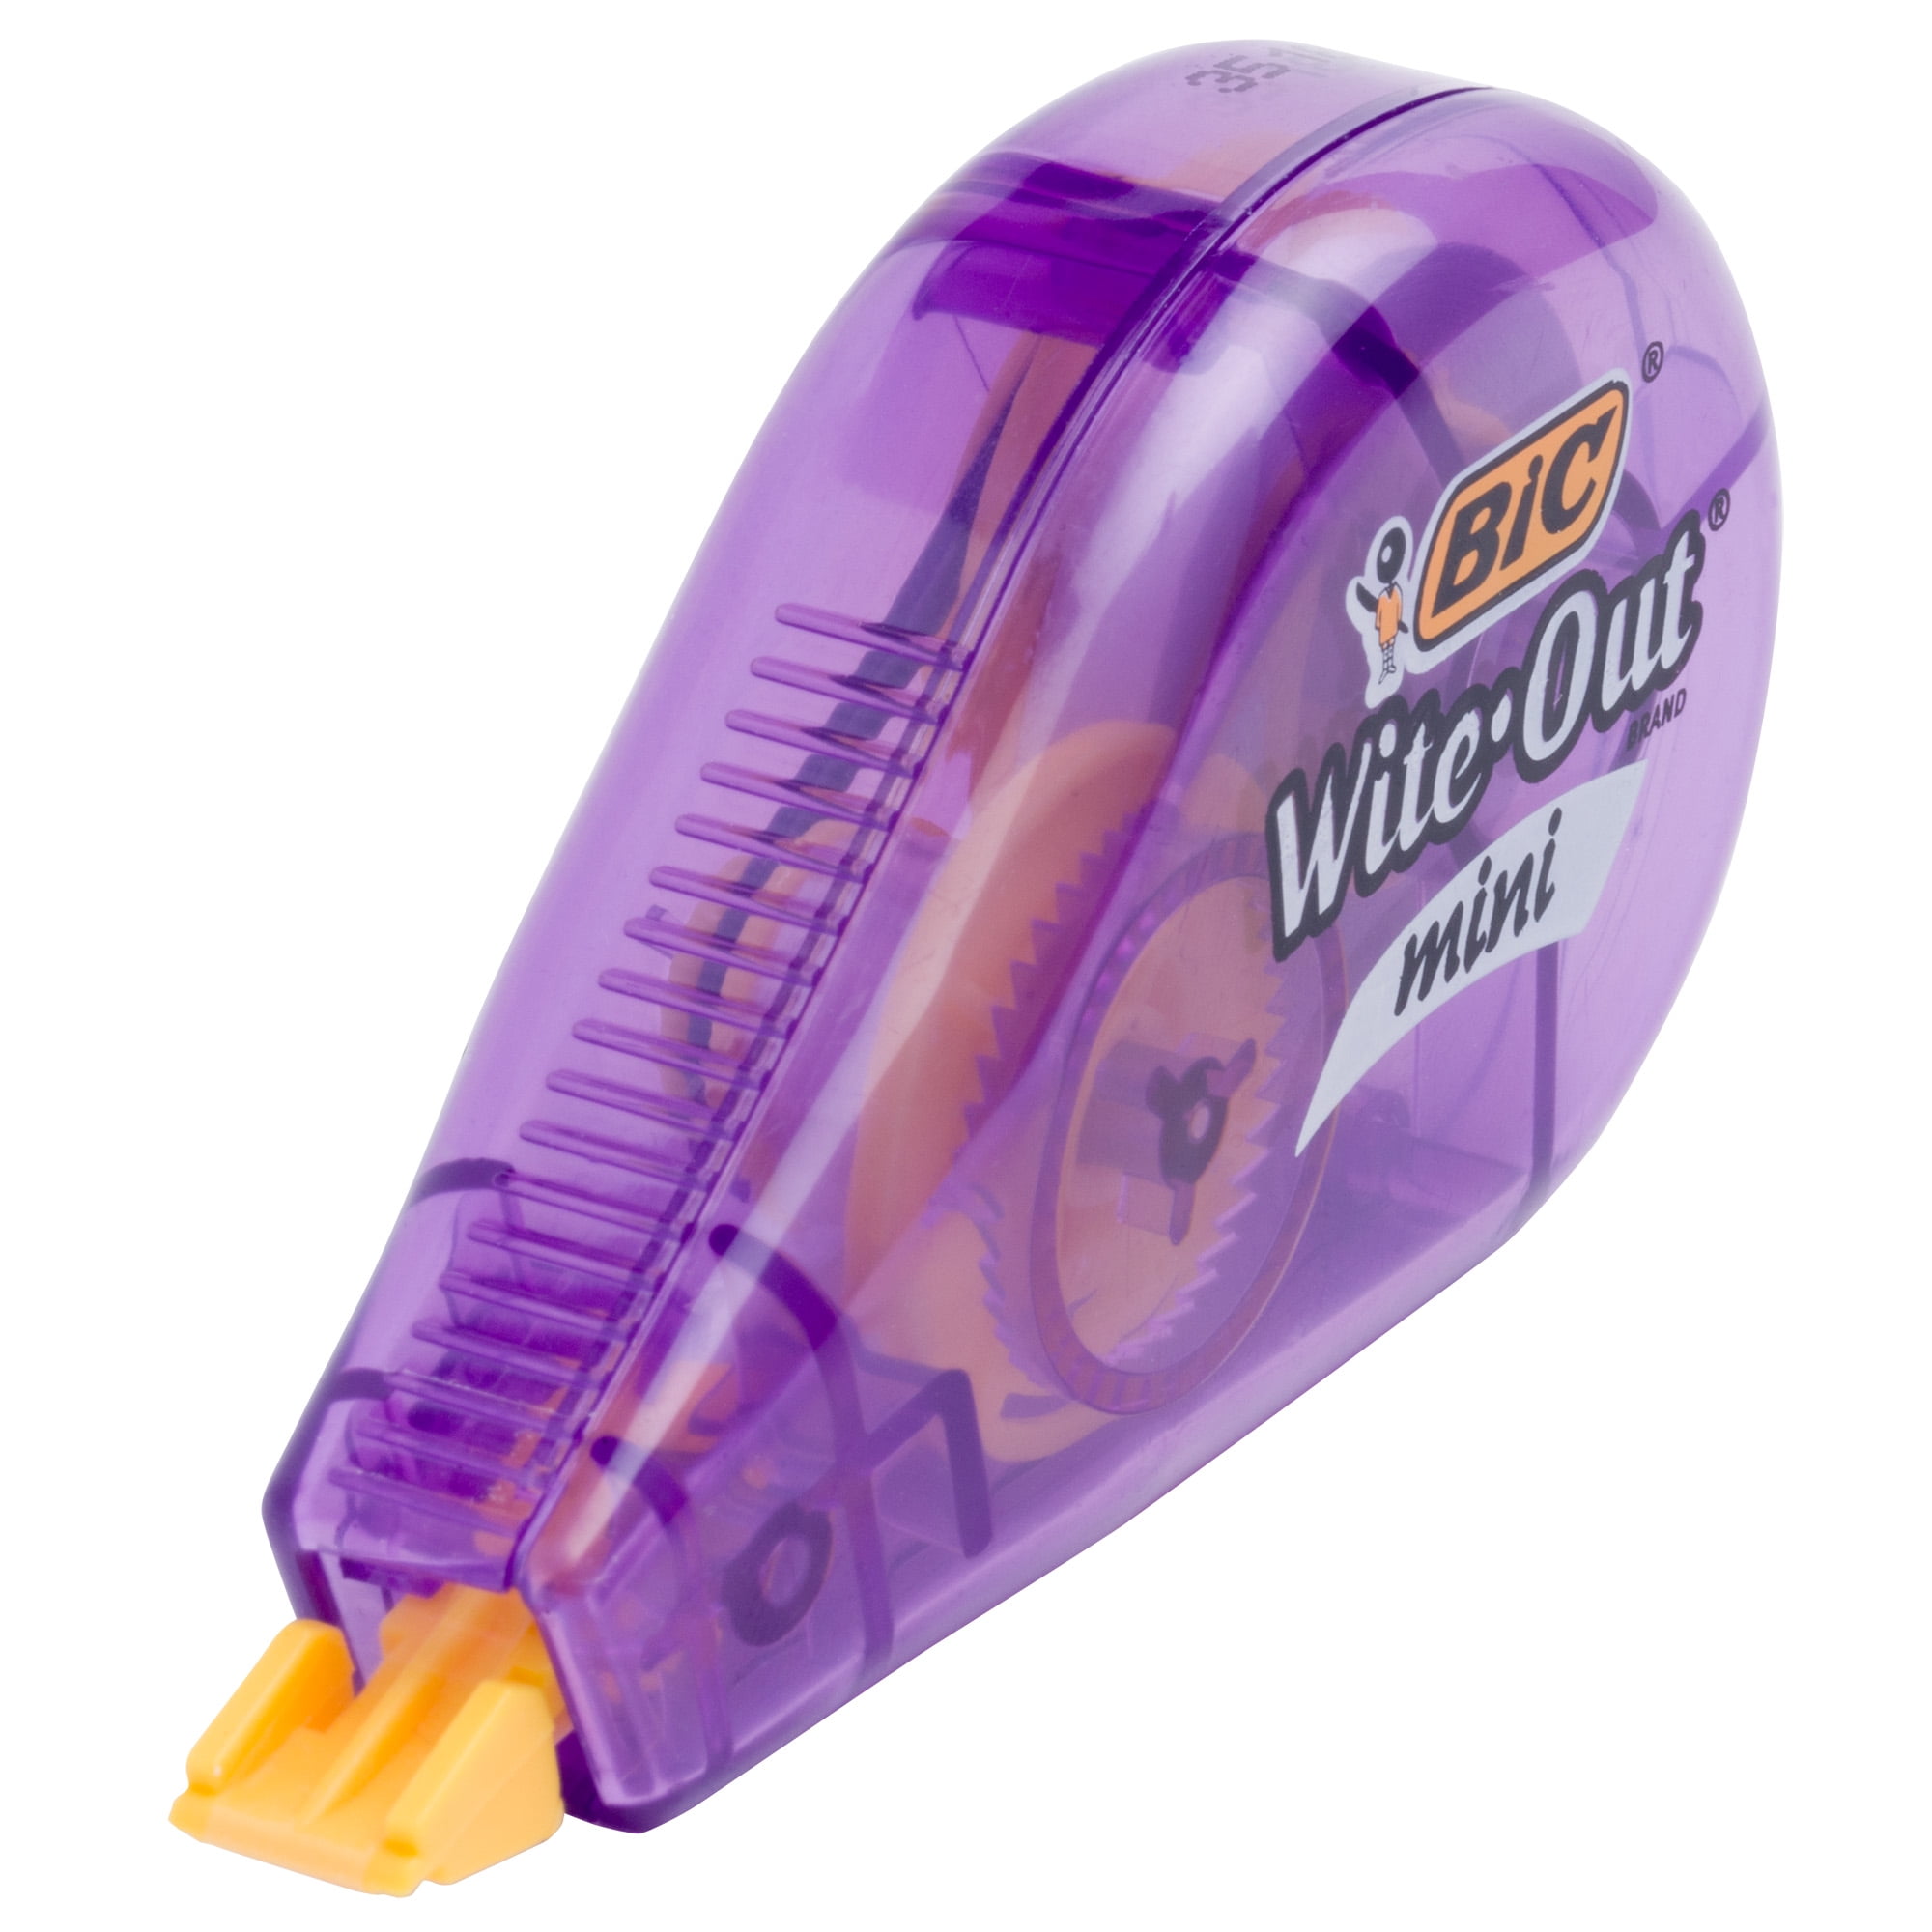 Wite-Out Mini Correction Tape Pack - 0.20 Width x 314.40 ft Length - 1  Line(s)Translucent Dispenser - Smooth, Compact, Ambidextrous, Easy to Use